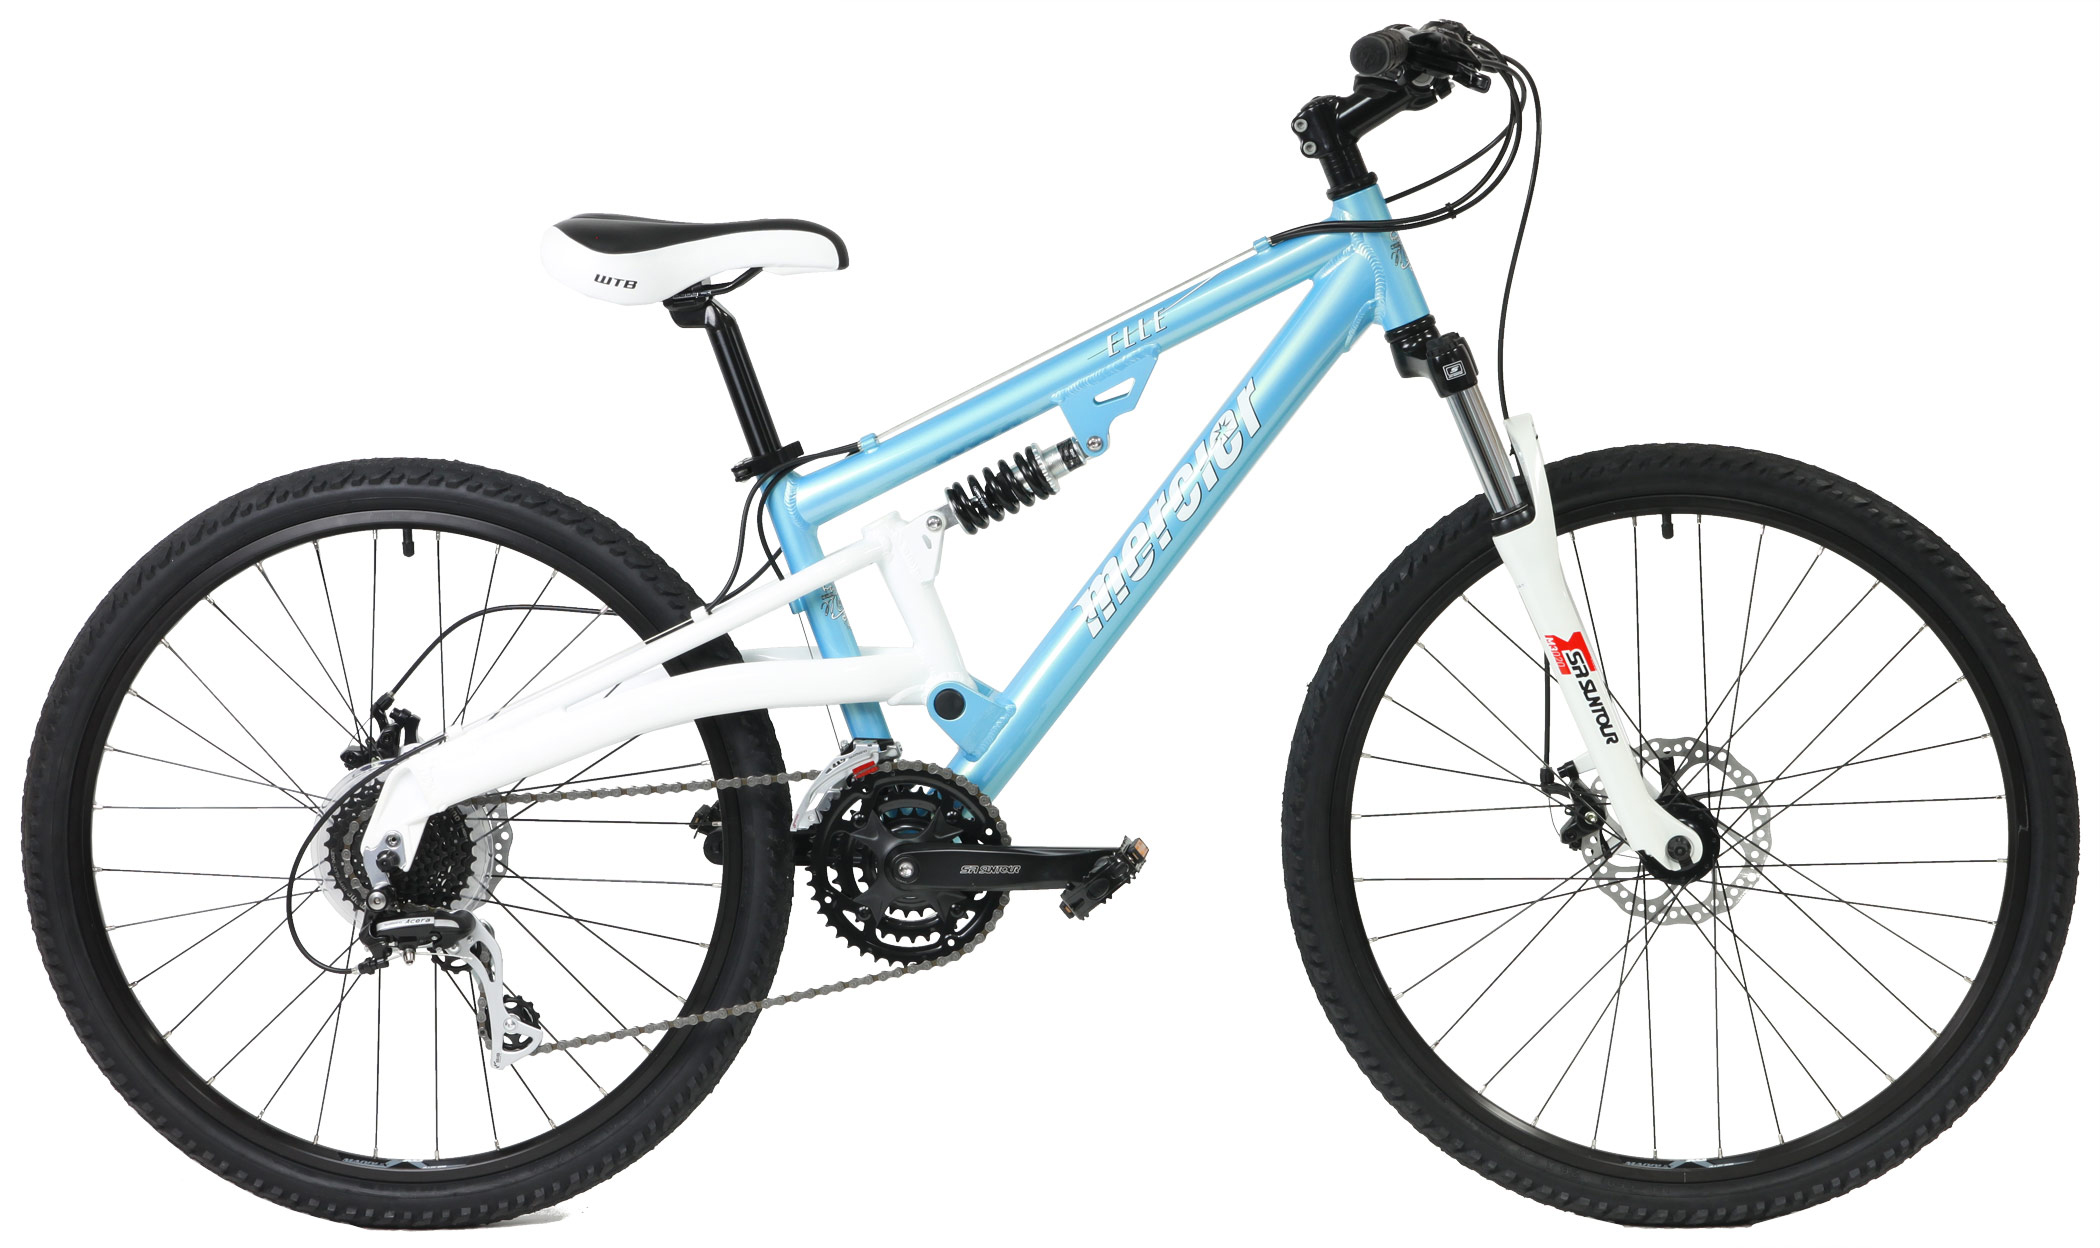 Save up to 60% off new Women's Sizes in Mountain Bikes - MTB - Full Suspension Mercier Mount Elle